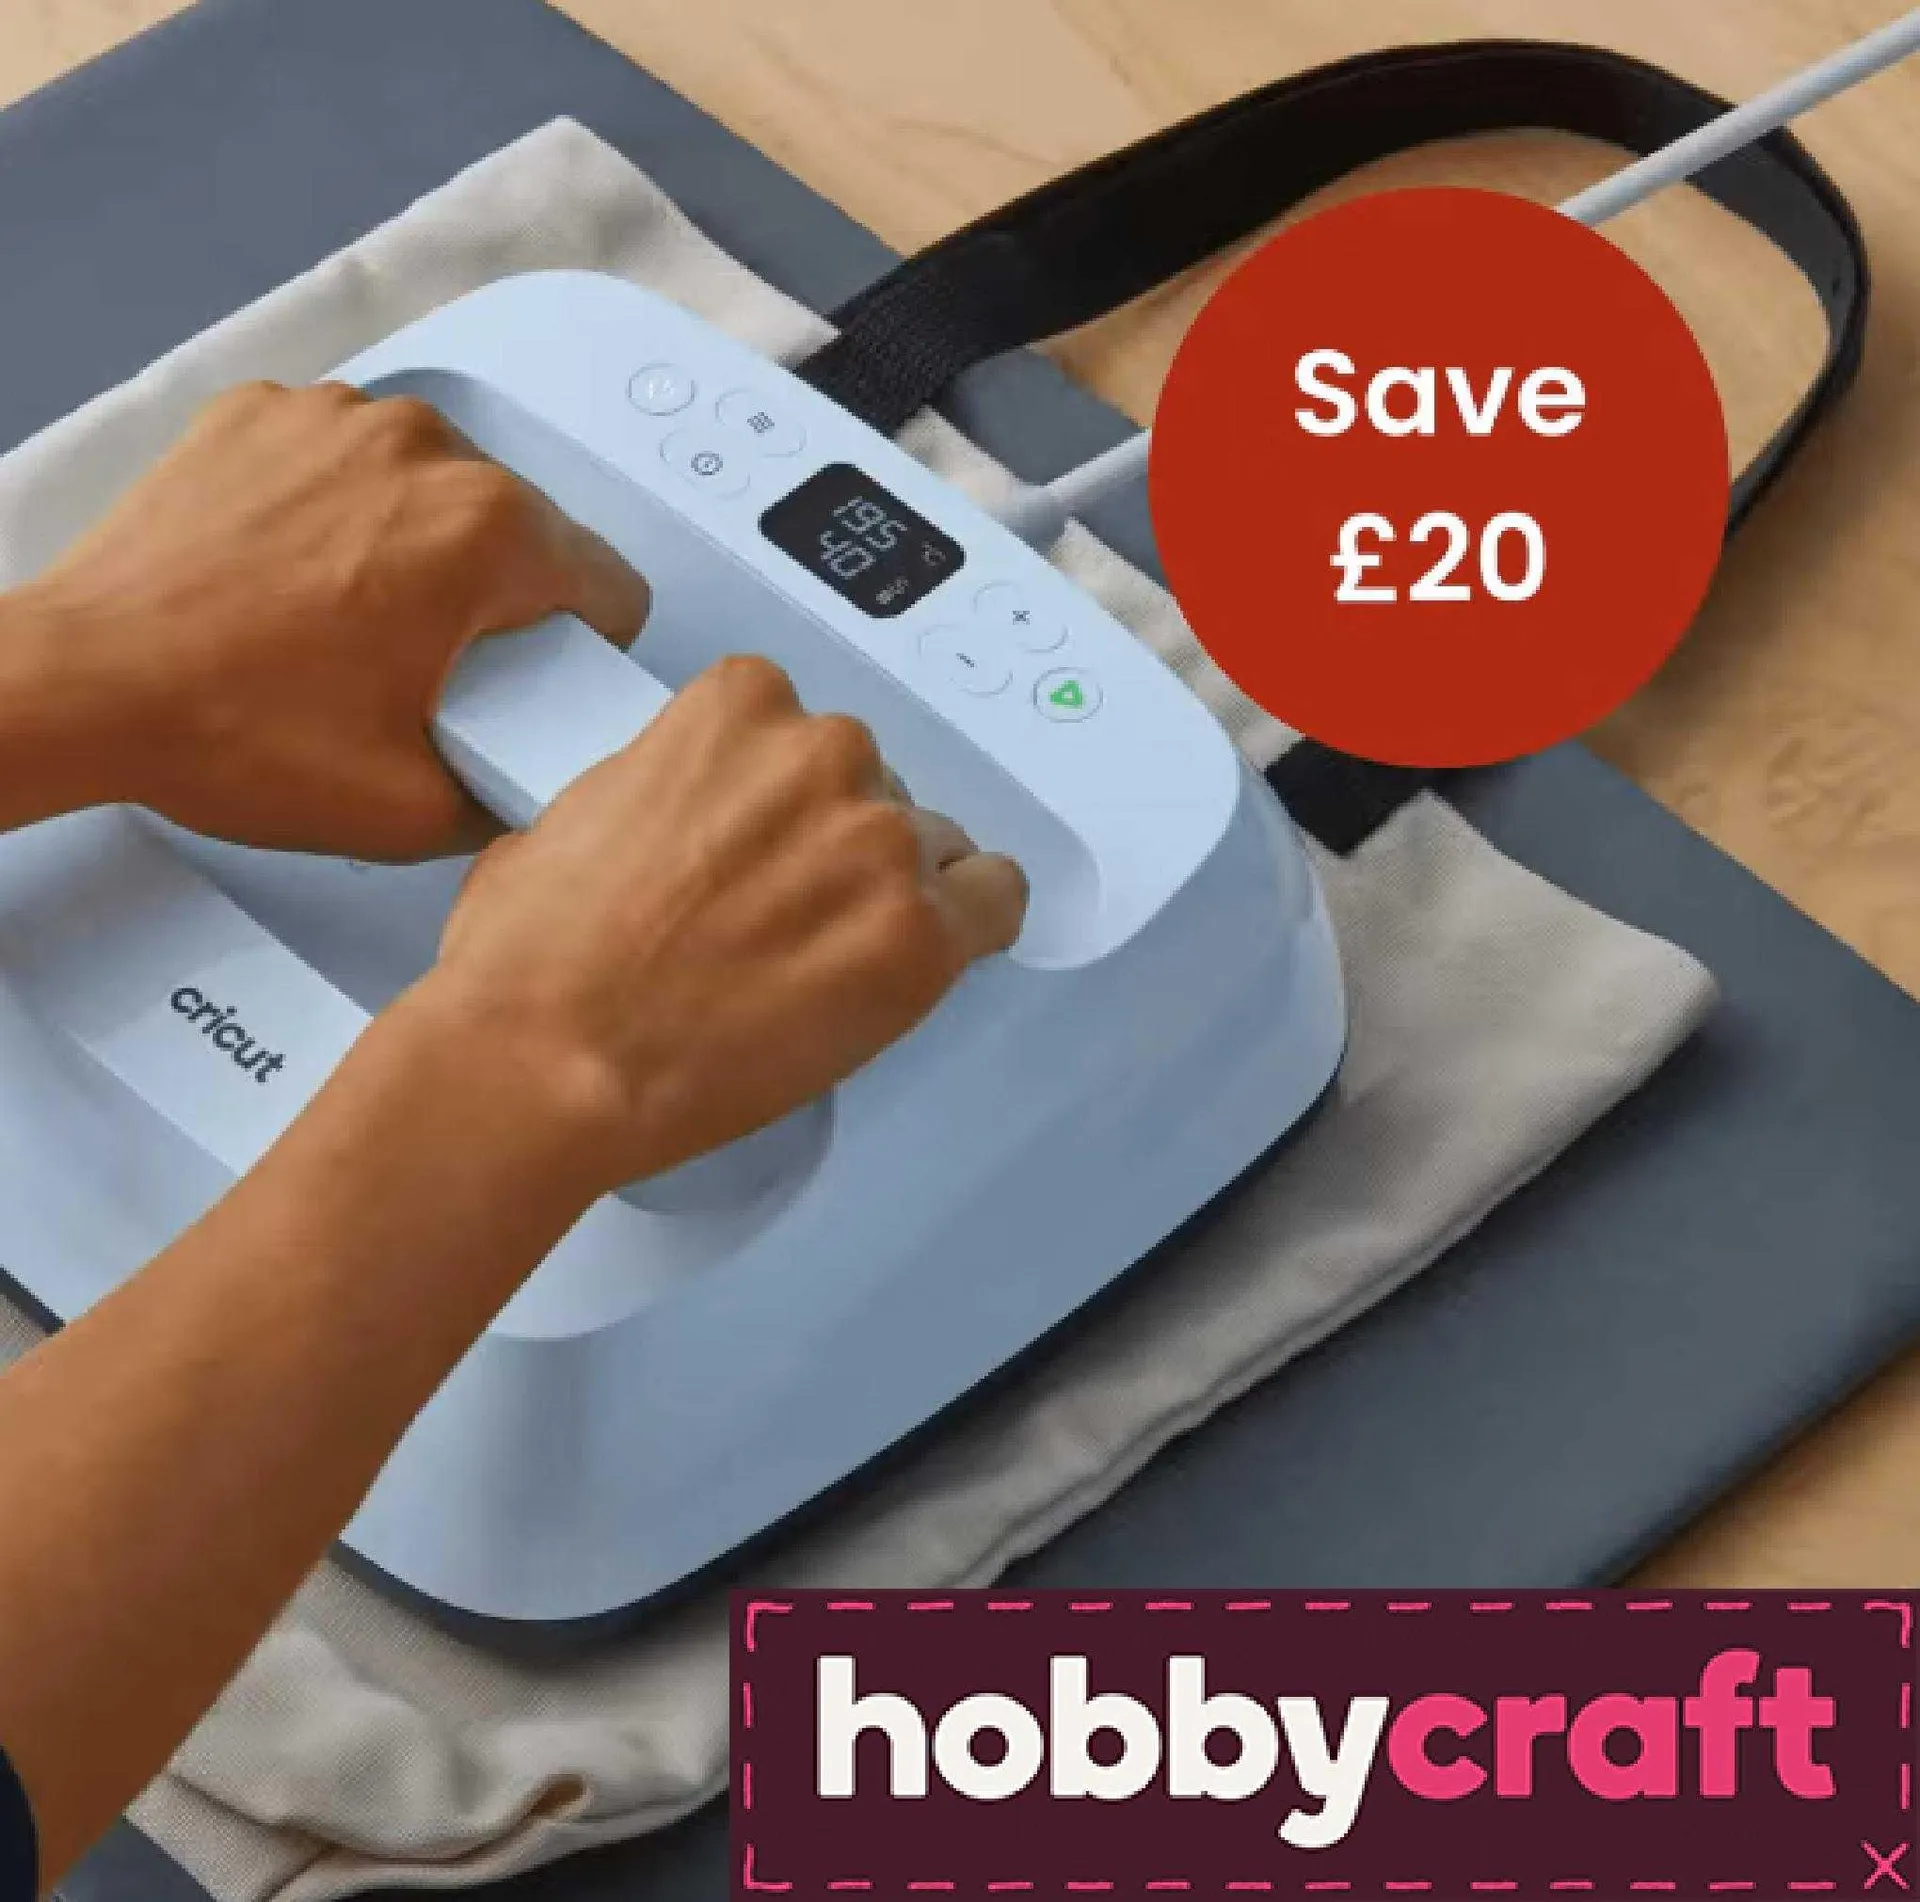 Hobbycraft Weekly Offers - 1